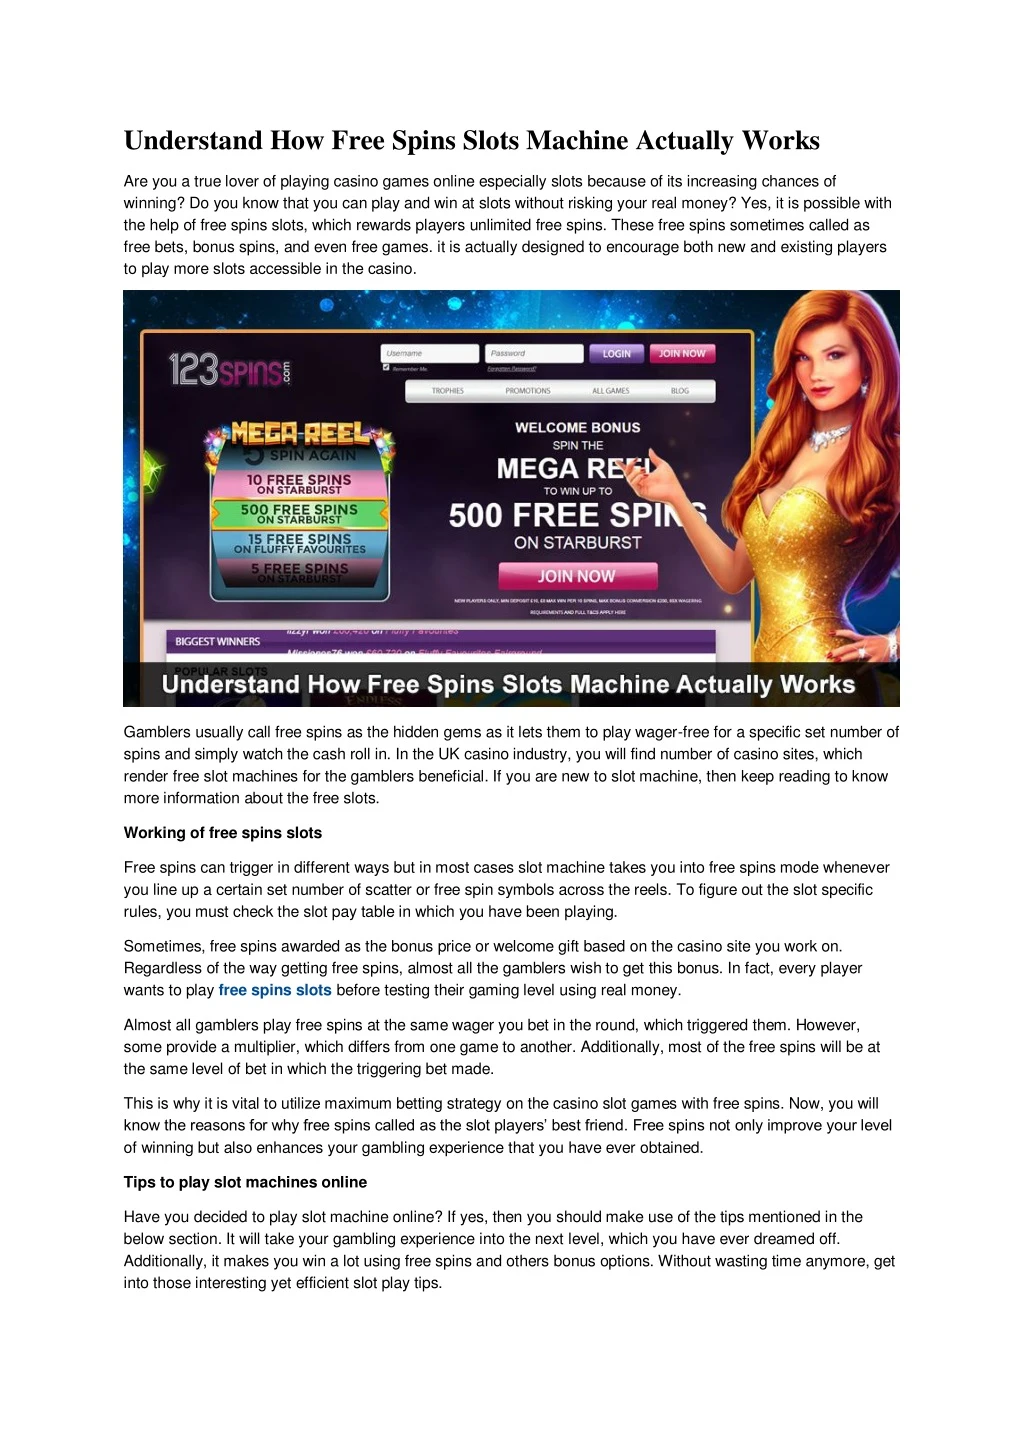 understand how free spins slots machine actually